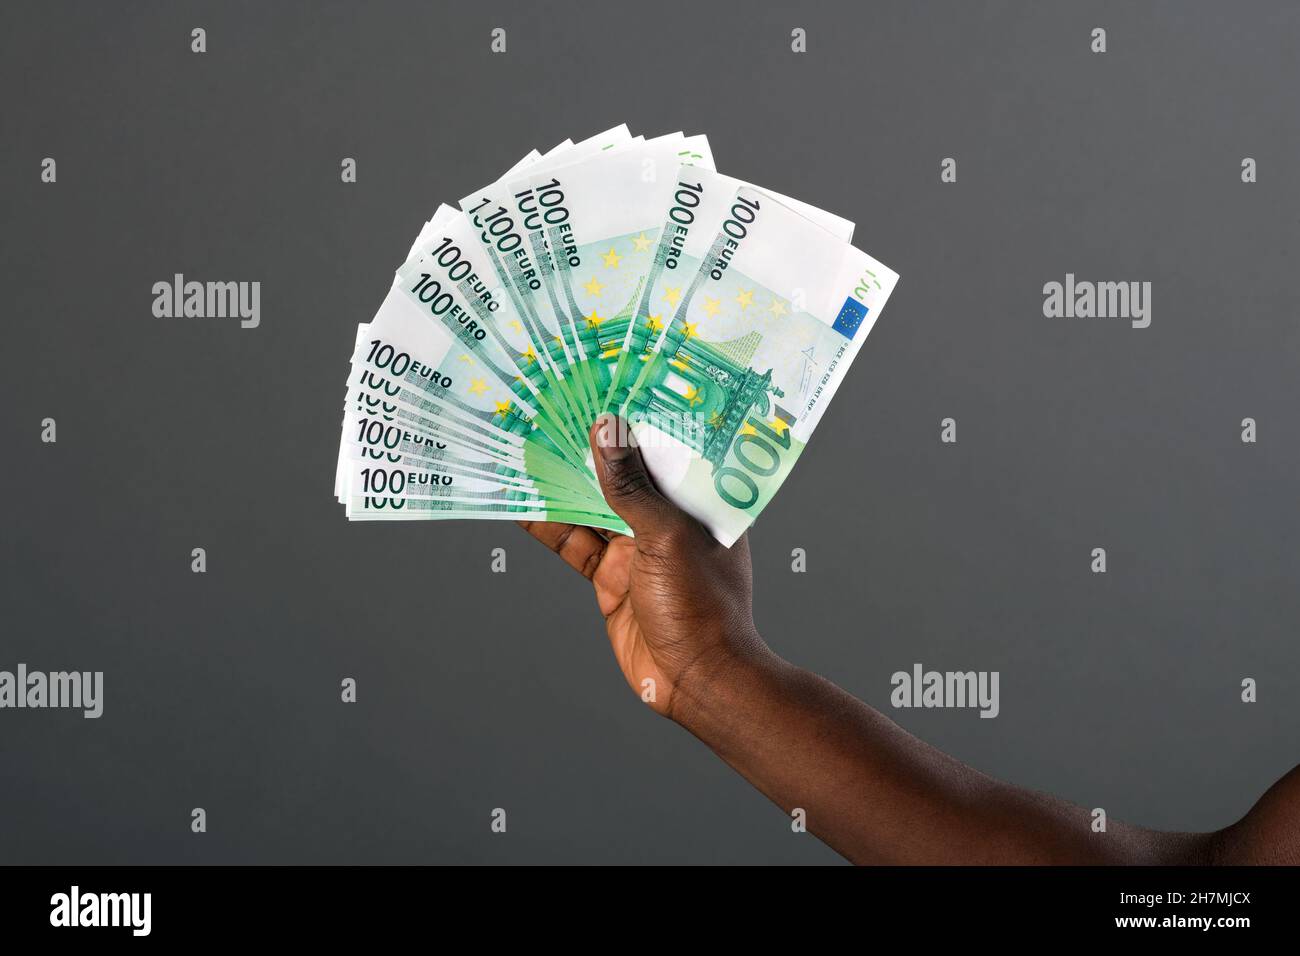 Black hand holding large fan of 100 Euro banknotes with a studio background. Stock Photo